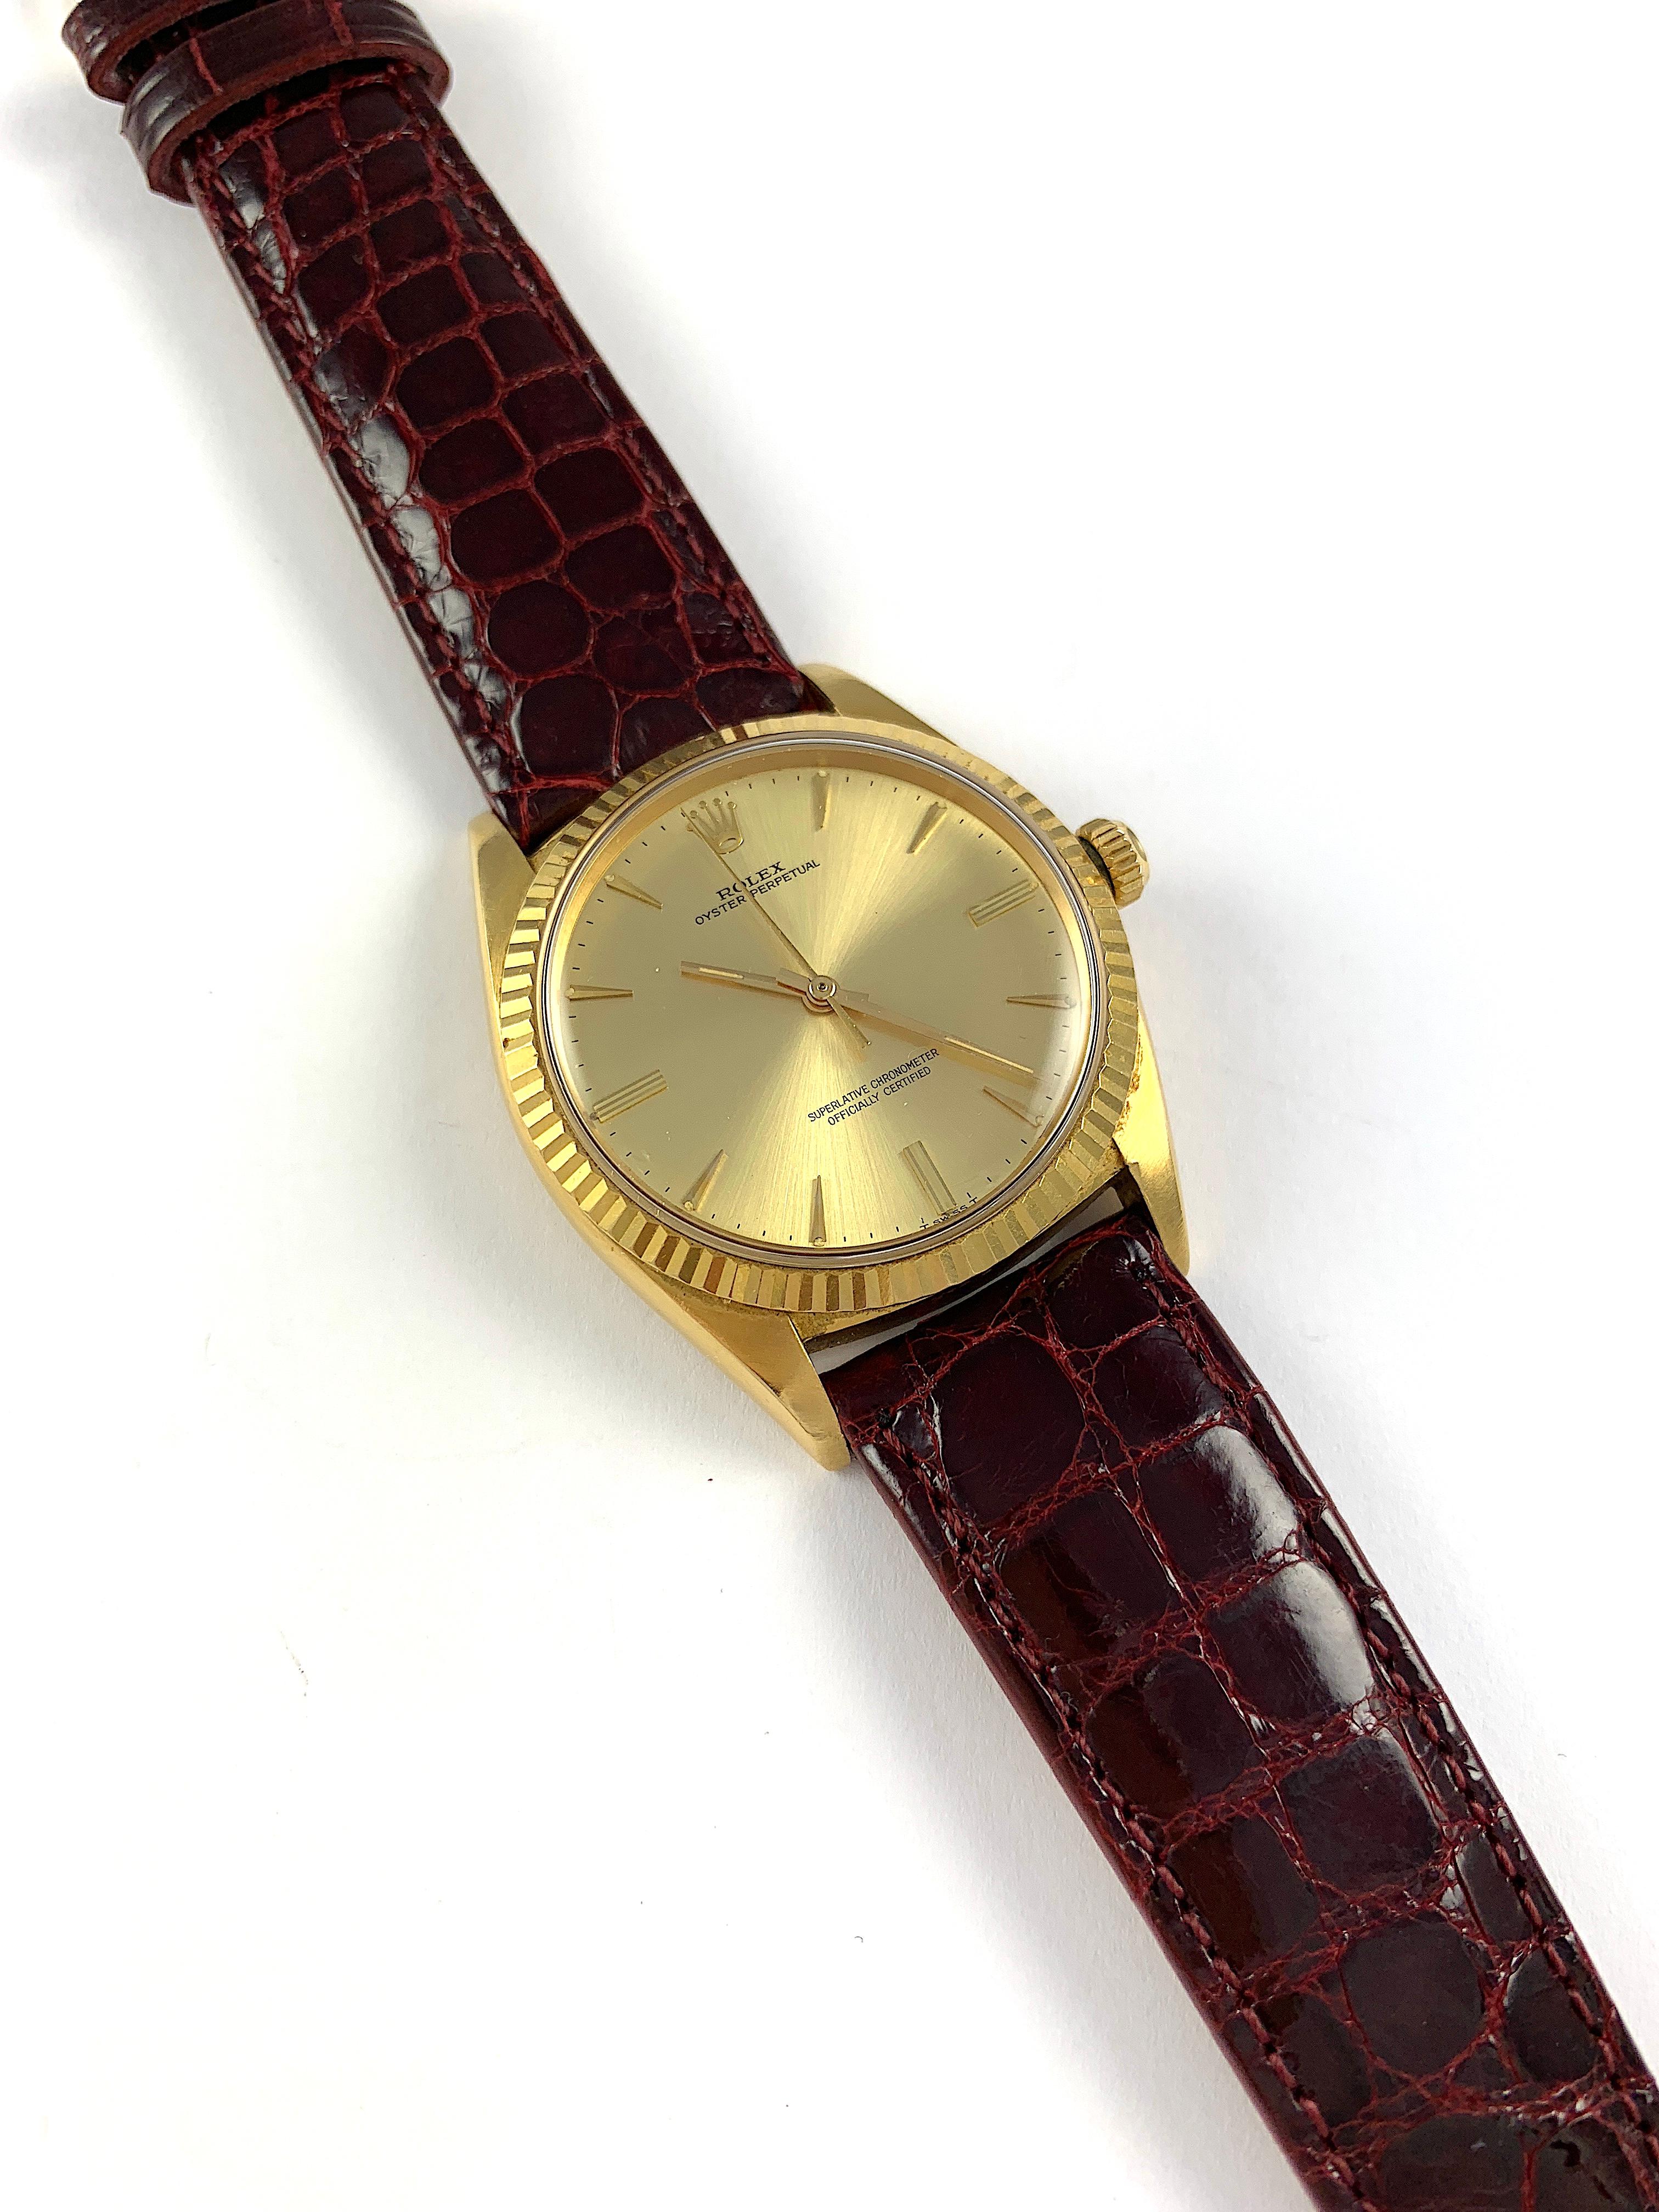 Rolex 18K Yellow Gold Oyster Perpetual  Automatic Watch
Rare Factory Champagne T Swiss T Dial with Unusual Hour Markers
Yellow Gold Fluted Bezel
18K Yellow Gold Case
36mm in size 
Features Rolex Automatic Chronometer  Movement 
Acrylic Crystal
From 